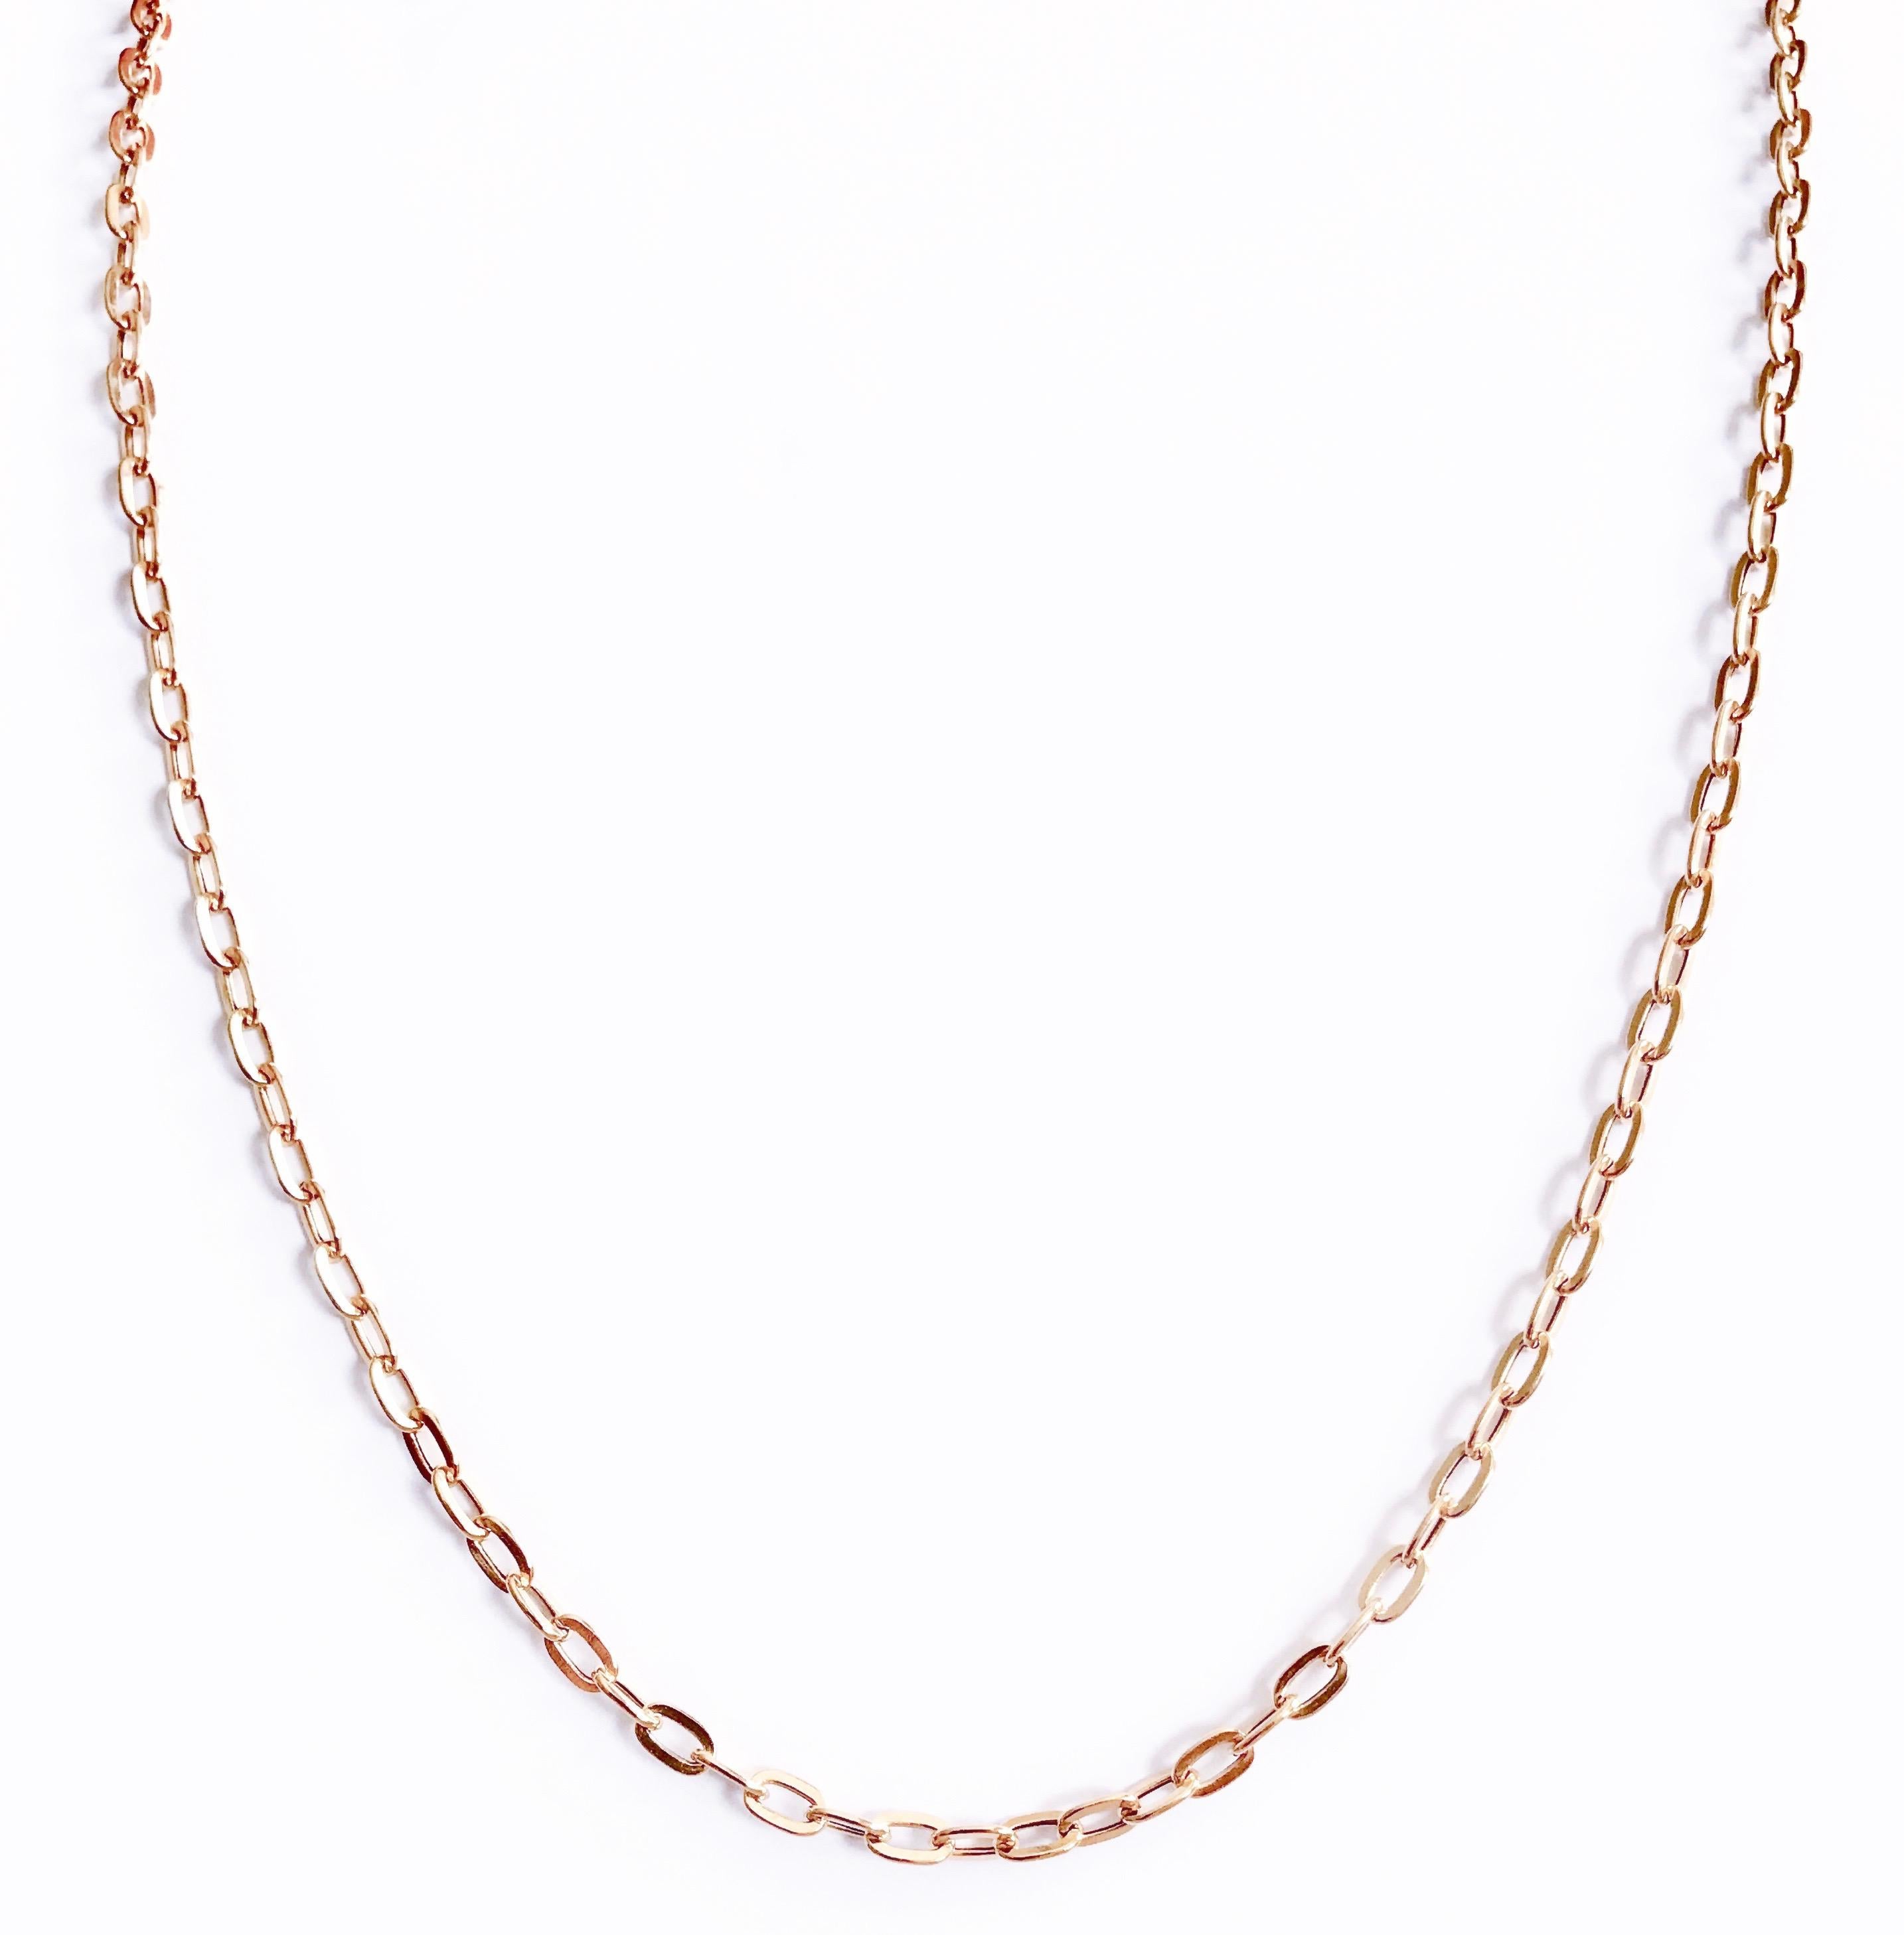 18 Karat yellow gold chain.
Ideal to wear with pendants, layered with other chains or just on its own.
Gauge:  2.5 mm
Length : 45.00 cm 
Hallmark: London’s  Goldsmiths’ Company –  Assay Office ( laser mark ) 
All our jewellery are new and have never